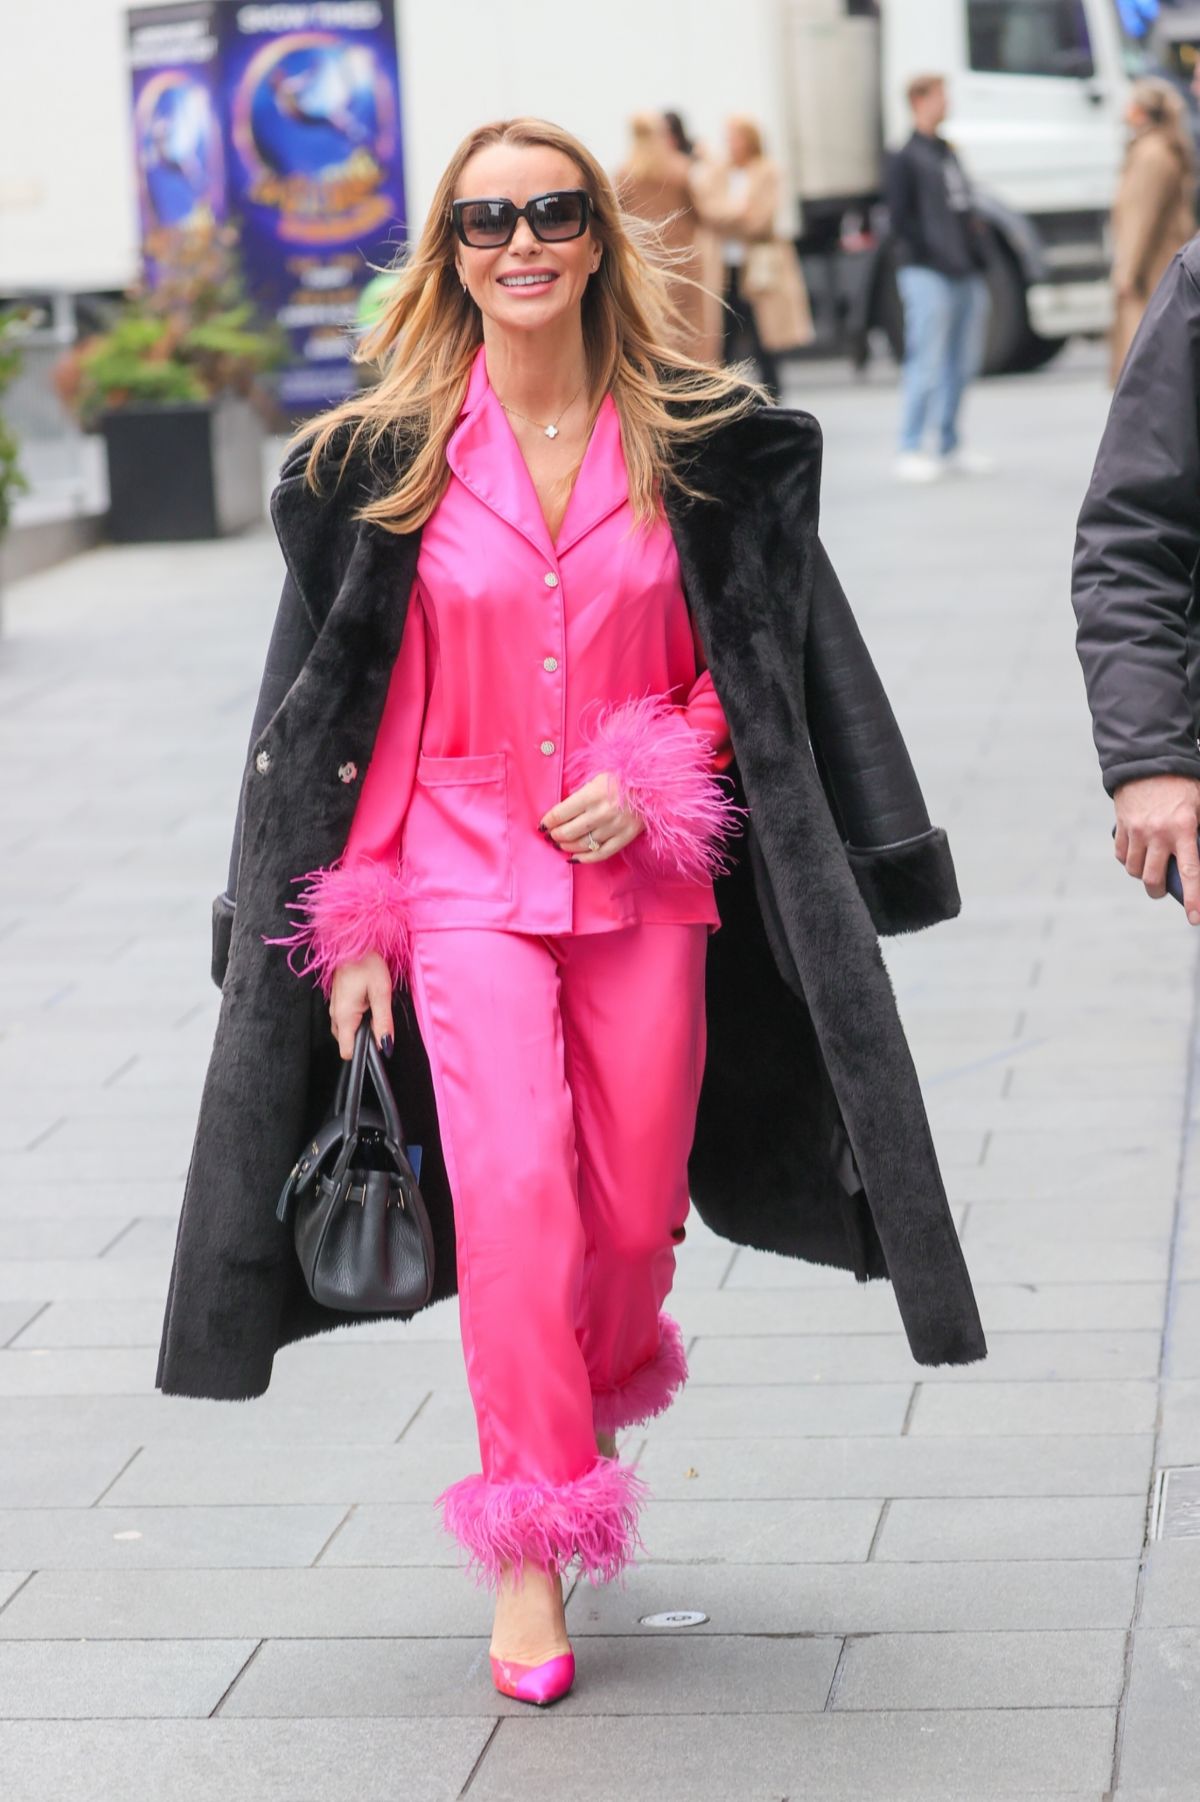 Amanda Holden arrives in Pink Outfit at Heart Radio London